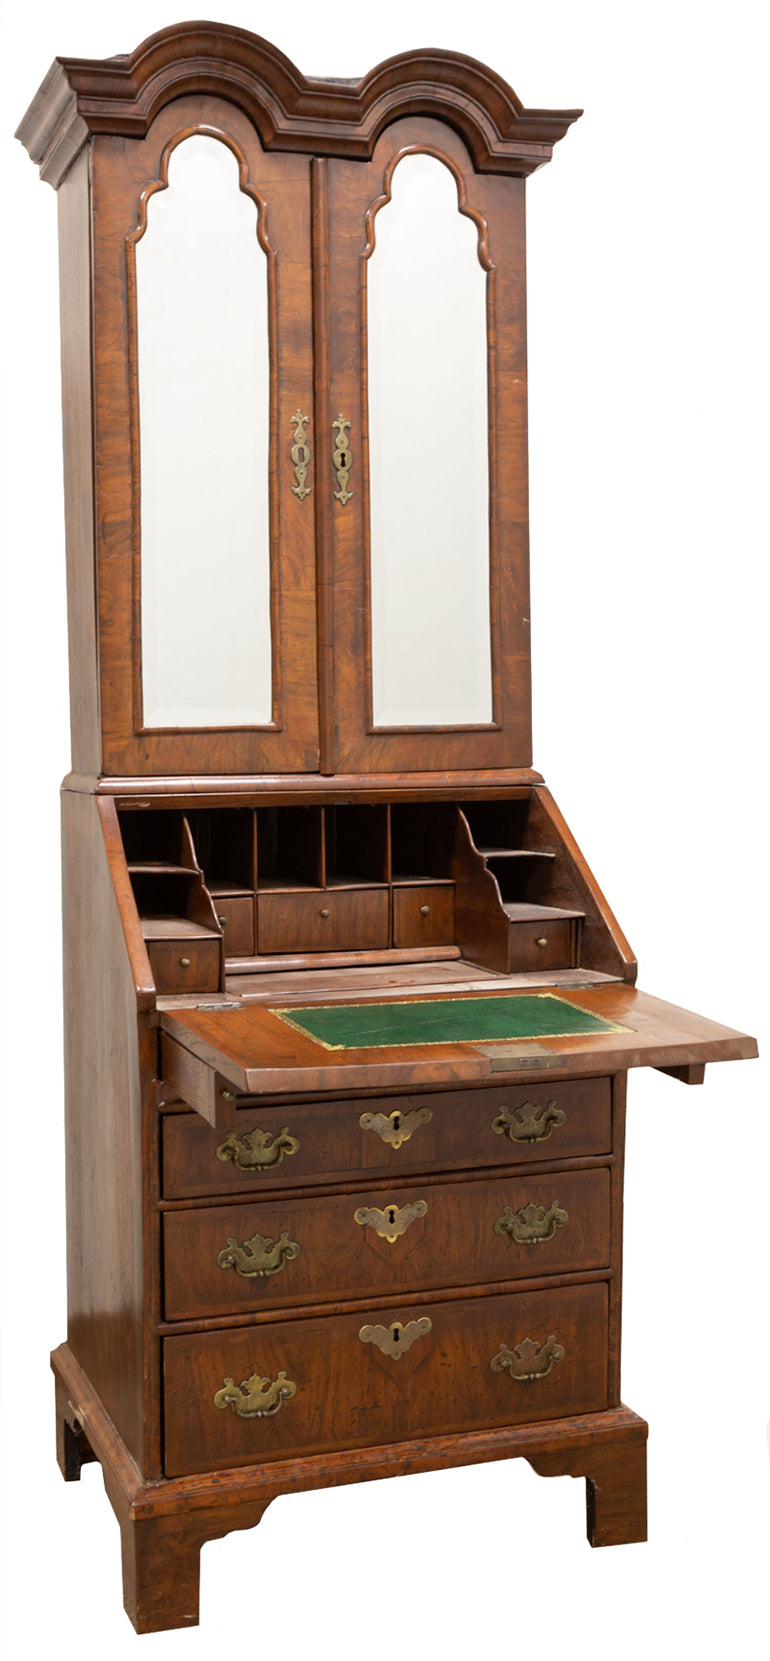 Early 19th Century George III Secrétaire Cabinet